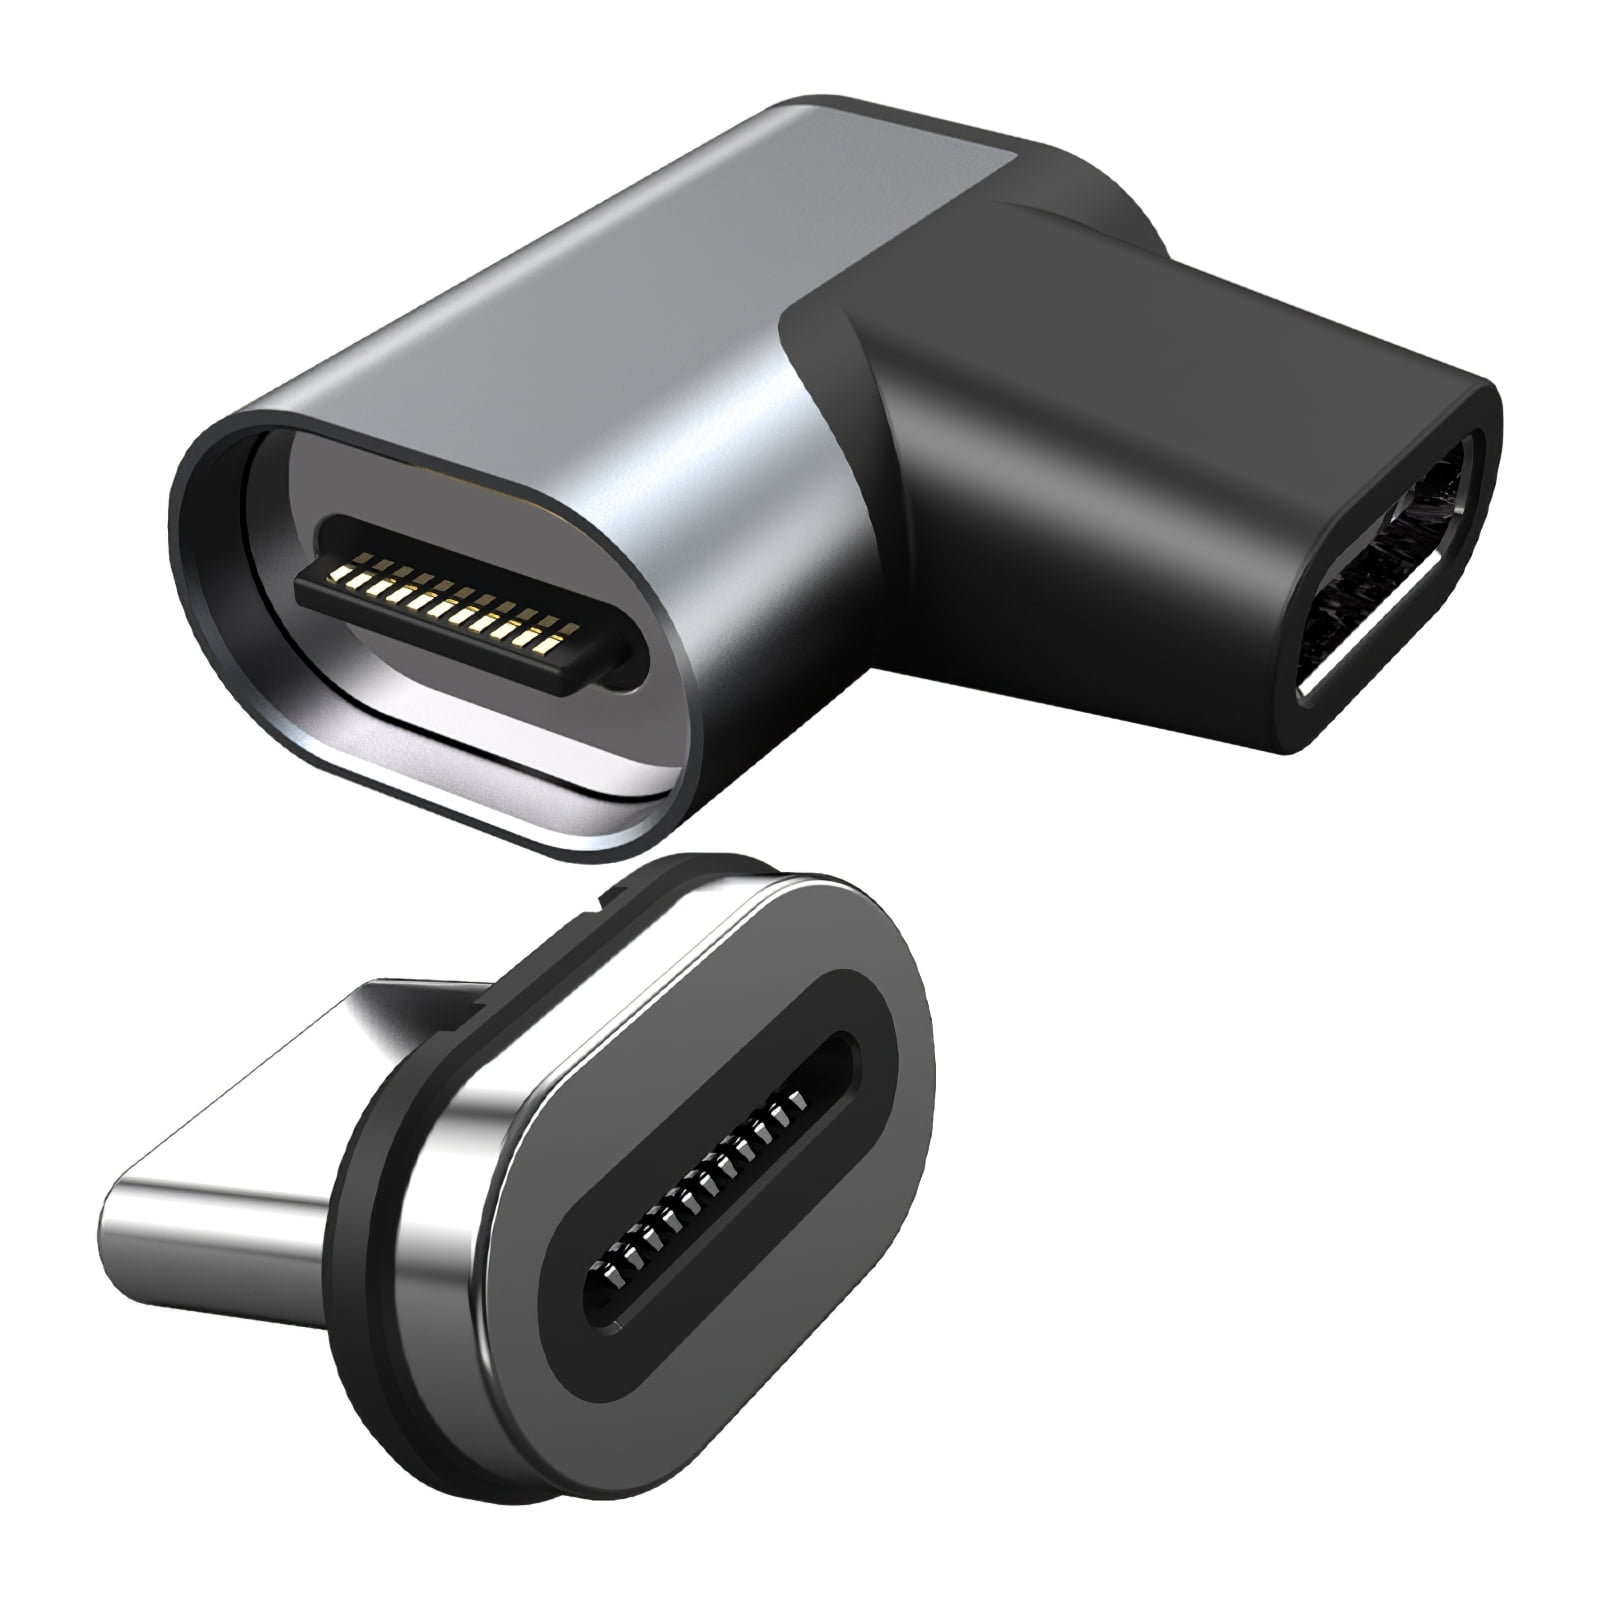 USB C to USB C Magnetic Cable 3.3ft Black 10Gb/s Data Transfer and 4K Video Output Compatible with MacBook Pro/Air and More Type C Devices 20 Pins Design PD Charger 100W Fast Charging 